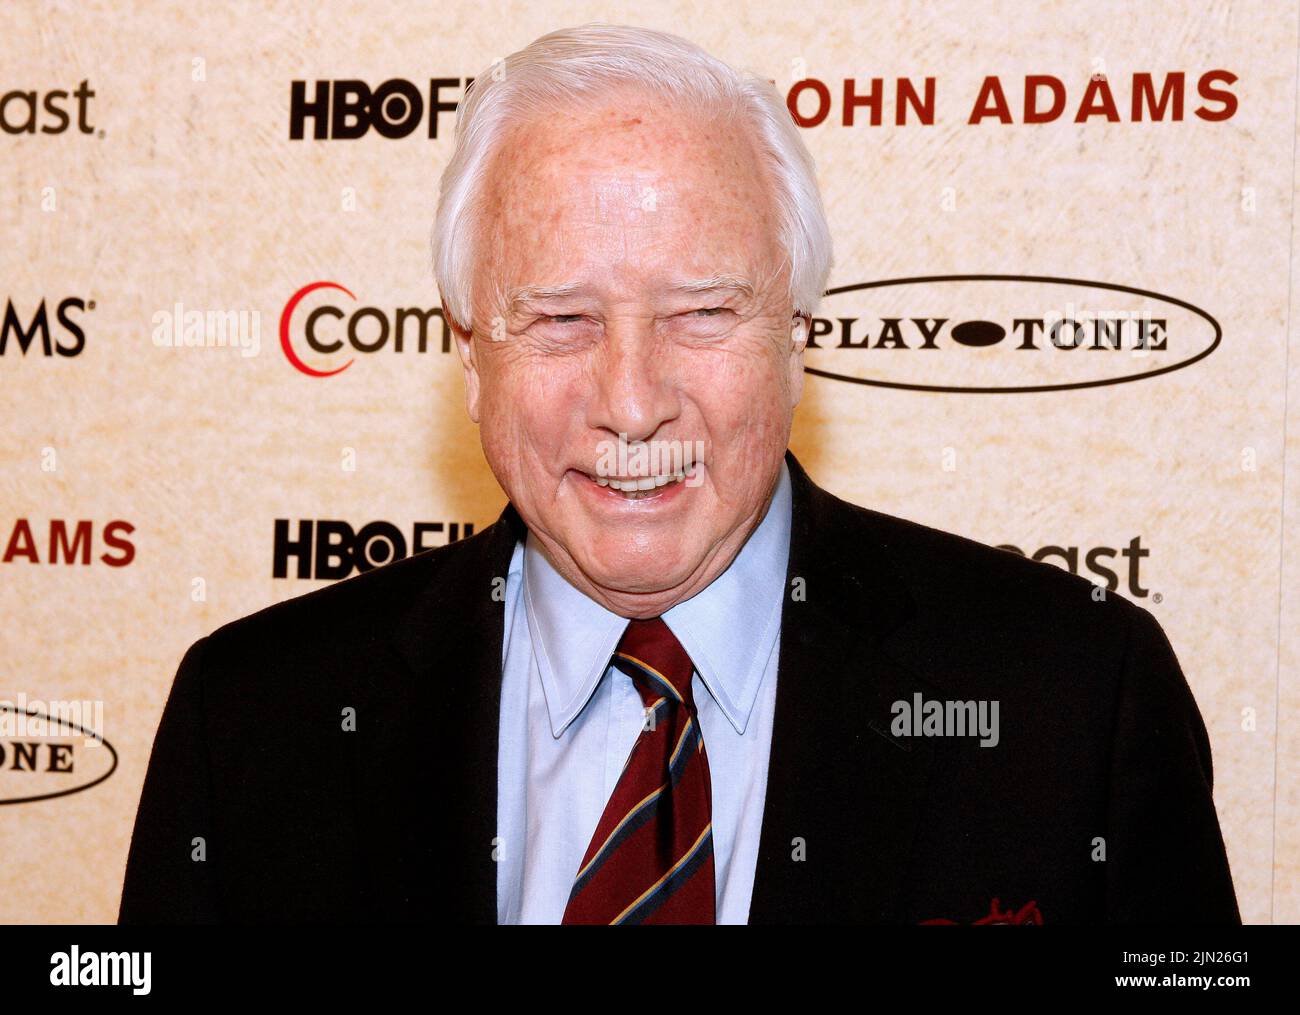 **FILE PHOTO** David McCullough Has Passed Away David McCullough, author of the book John Adams is pictured at the screening of John Adams at the National Constitution Center in Philadelphia on March 11, 2008.Credit: Scott Weiner/MediaPunch Stock Photo